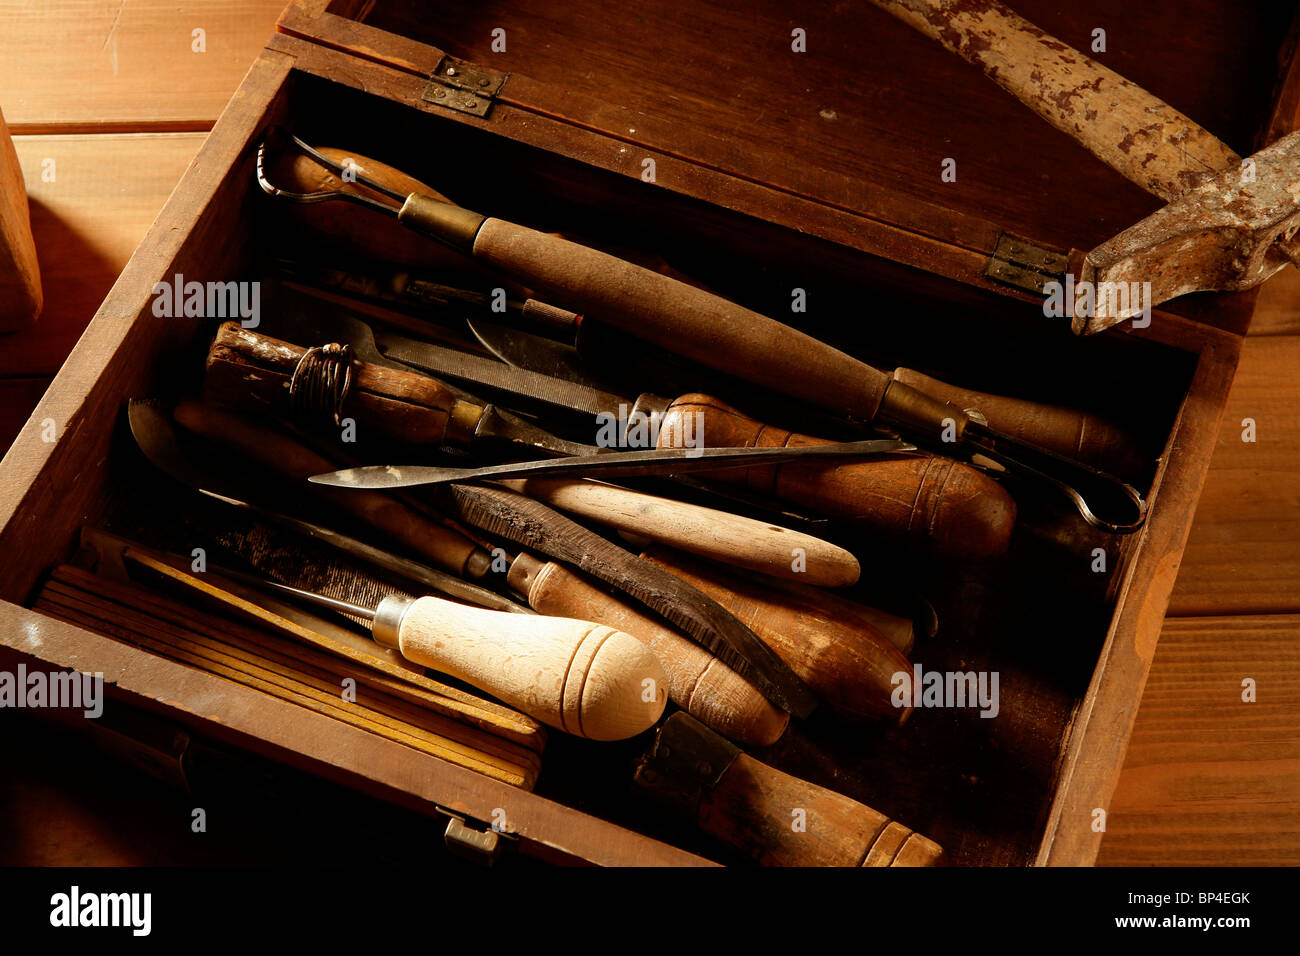 srtist hand tools for handcraft works on golden wood background Stock Photo